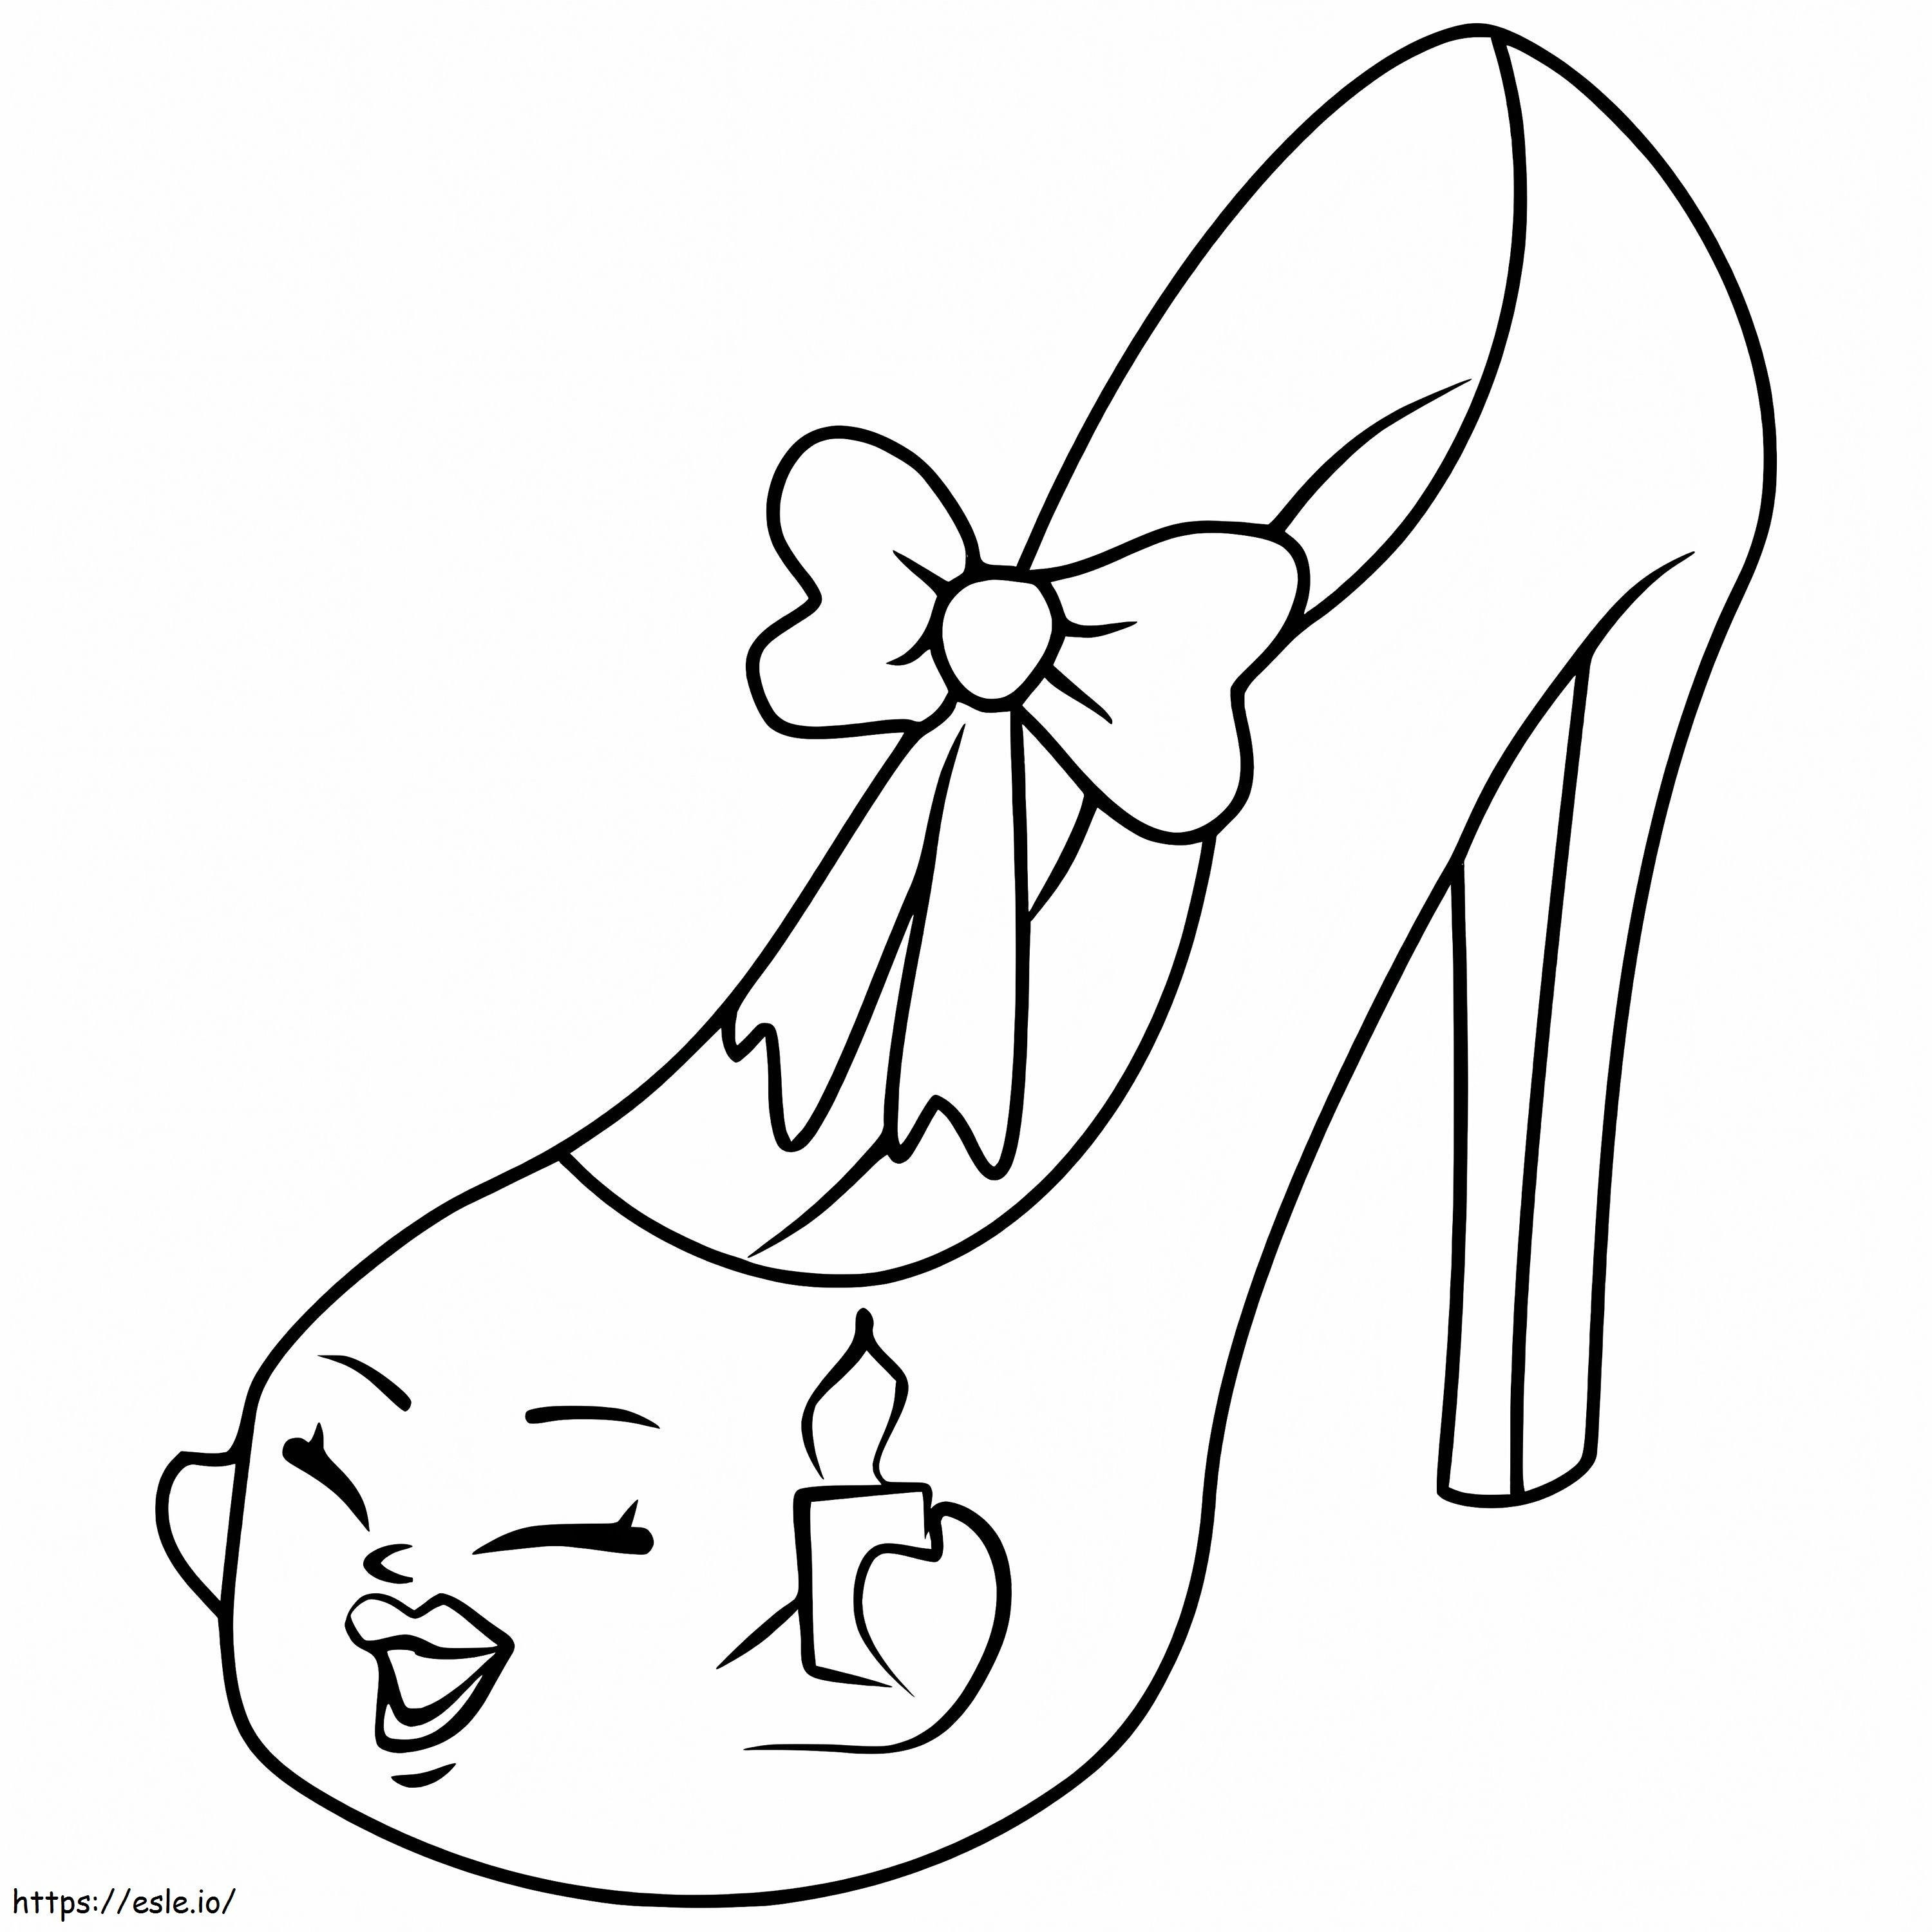 Shoes Prommy Shopkins coloring page